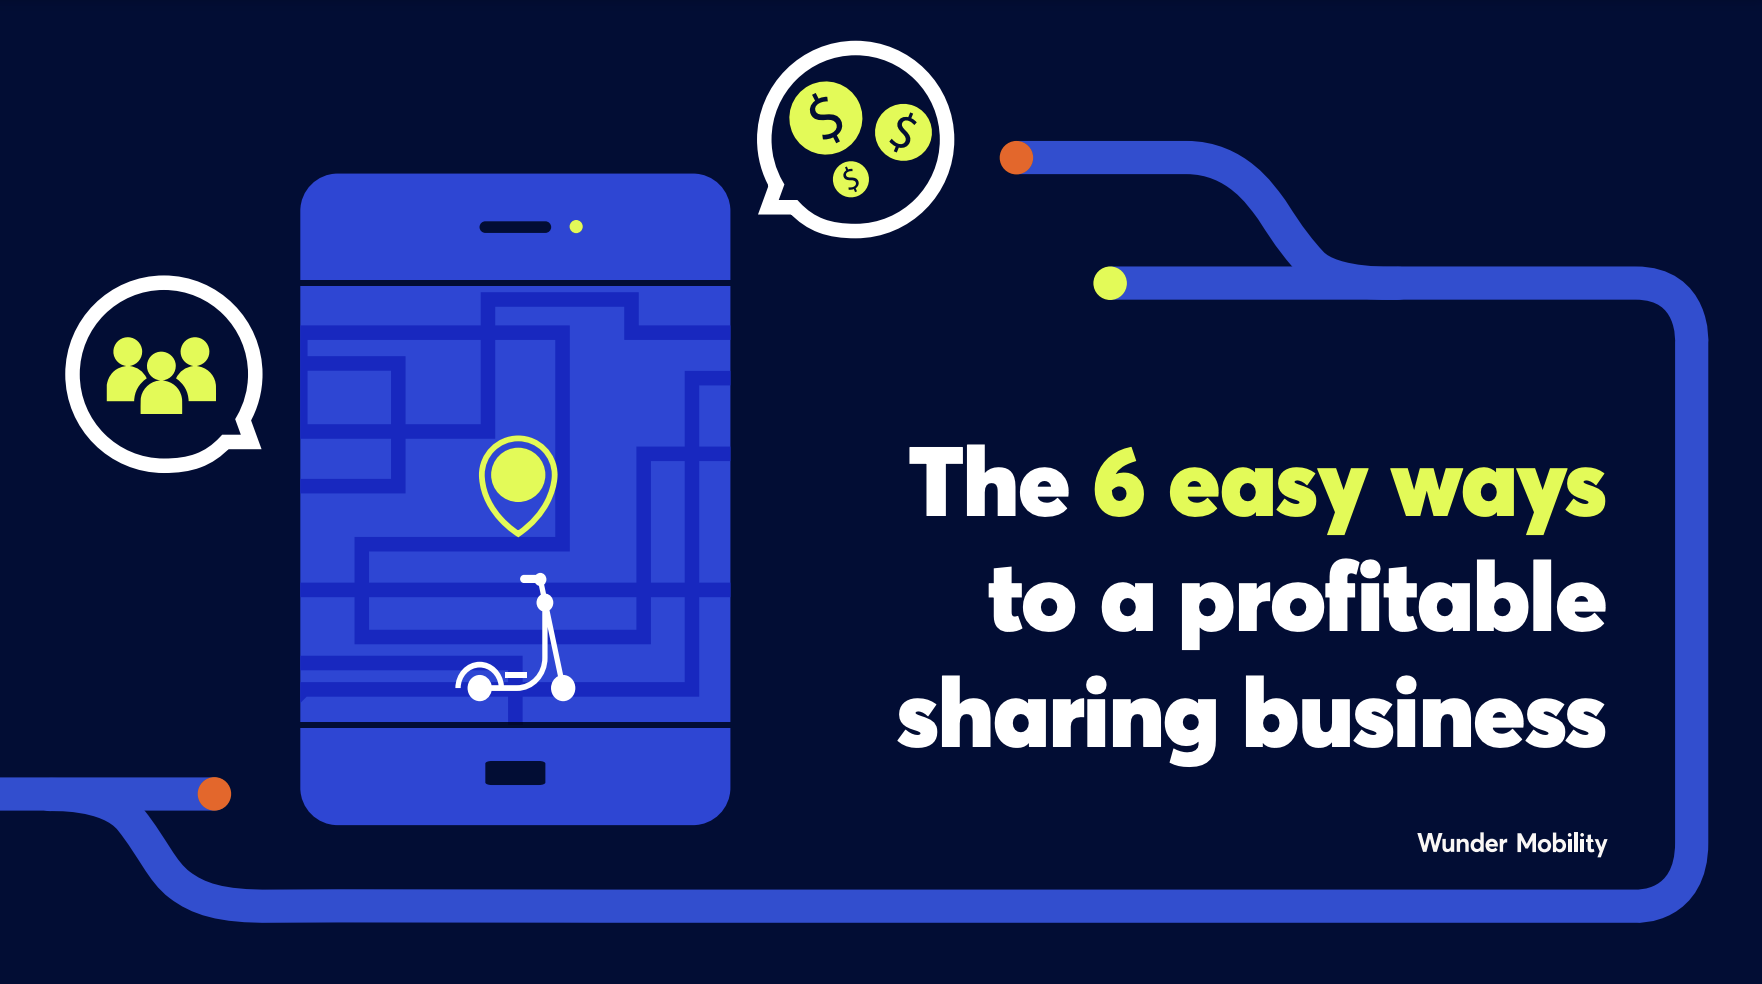 Cover image showing the title The 6 easy ways to a profitable sharing business.